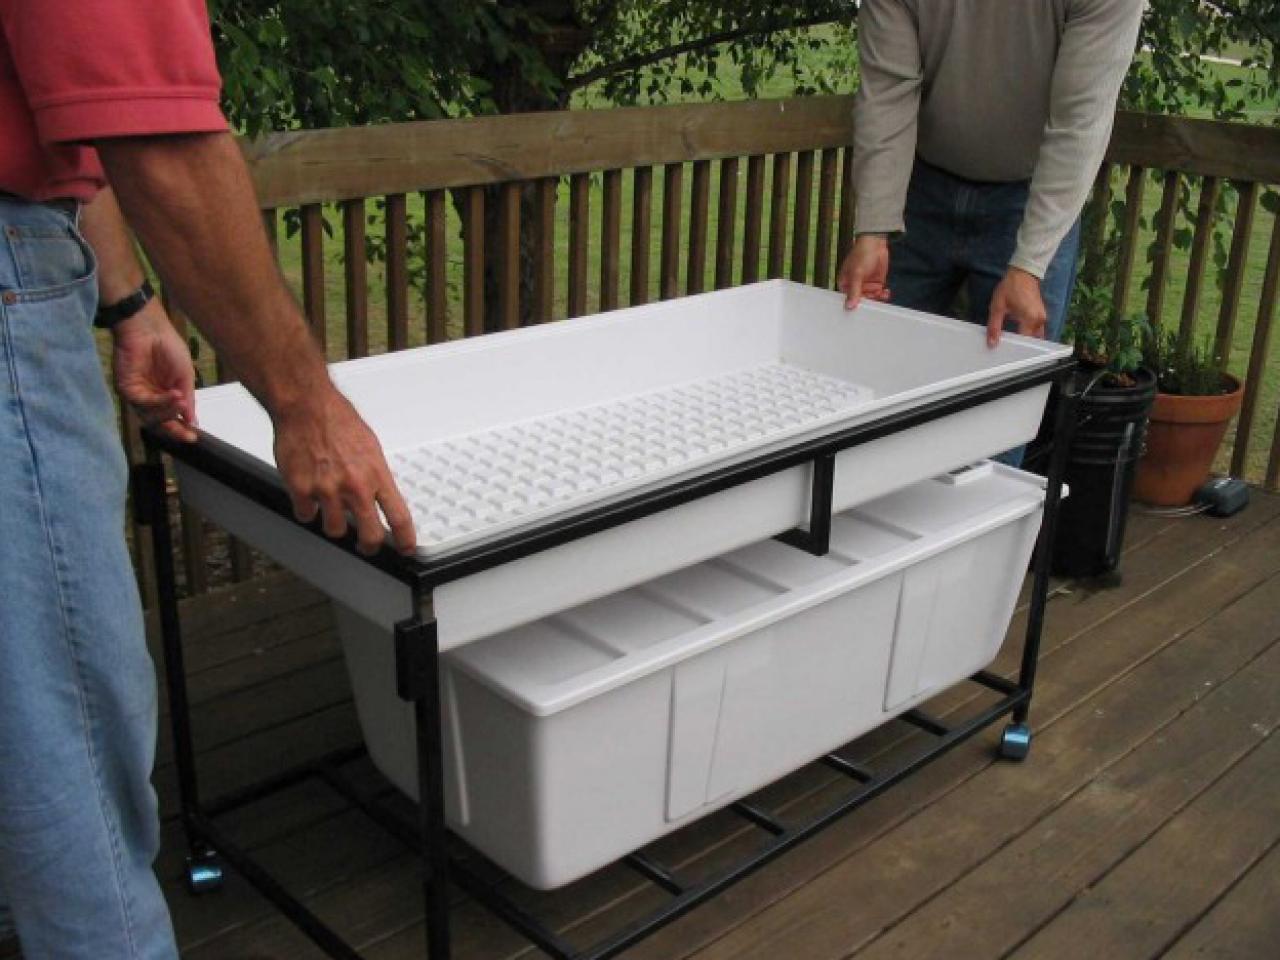 ... Flood-and-Drain Hydroponic System from a Kit | how-tos | DIY